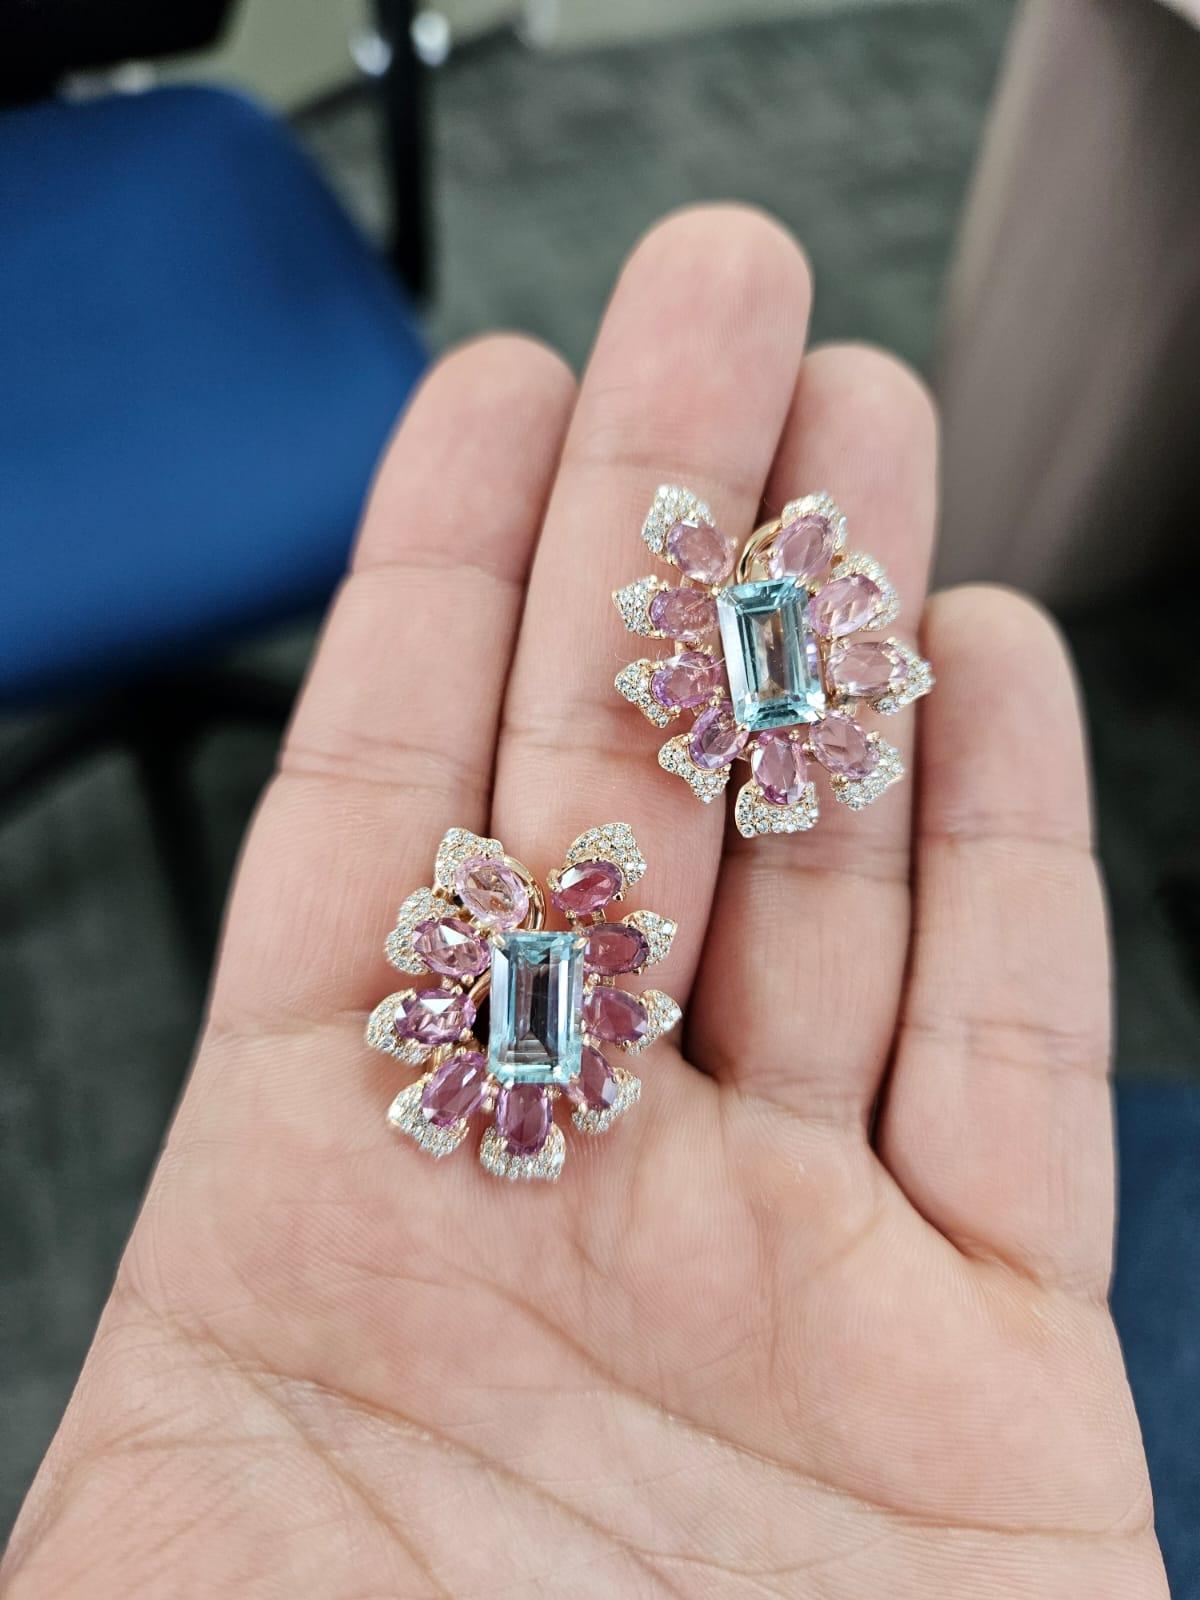 A very gorgeous and beautiful, modern style, Aquamarine & Multi Sapphire Stud Earrings set in 18K Rose Gold & Diamonds. The weight of the Aquamarine is 6.50 carats. The weight of the Multi Sapphire Rose Cuts is 6.90 carats. The Multi Sapphires are